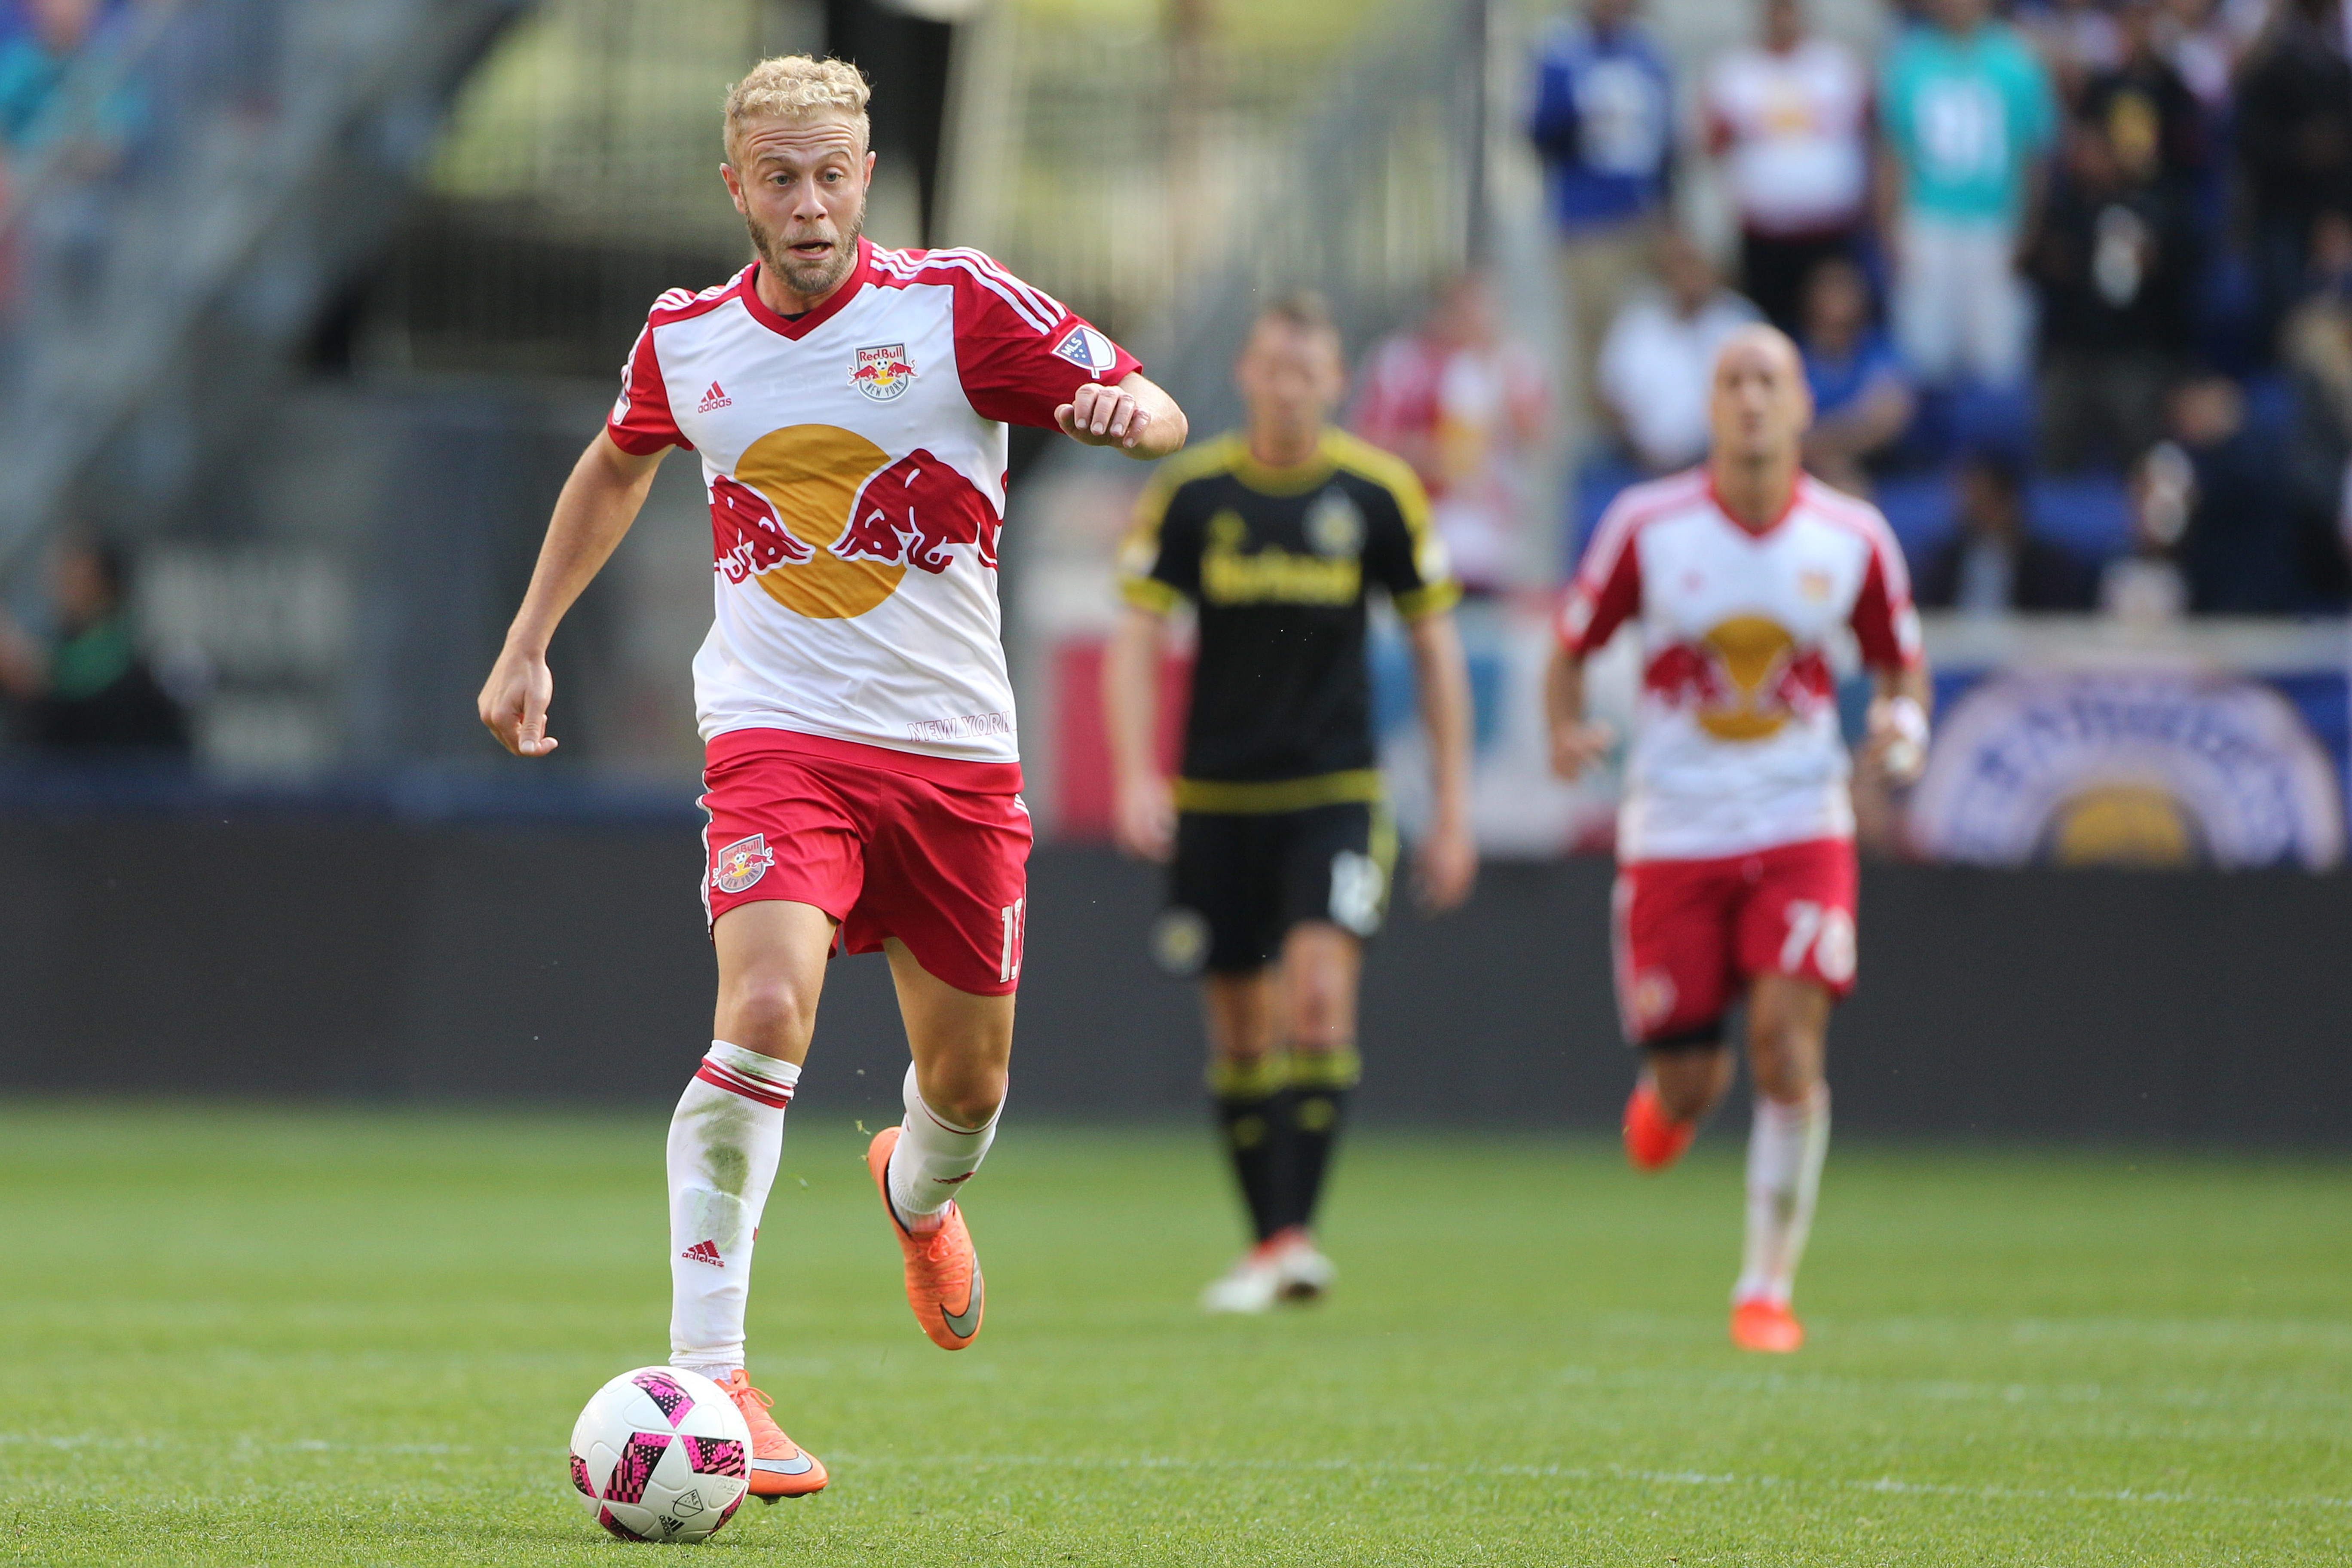 HARRISON, NEW JERSEY- OCTOBER 16: Mike Grella #13 of New York Red Bulls in action during the New York Red Bulls Vs Columbus Crew SC MLS regular season match at Red Bull Arena, on October 16, 2016 in Harrison, New Jersey. (Photo by Tim Clayton/Corbis via Getty Images)